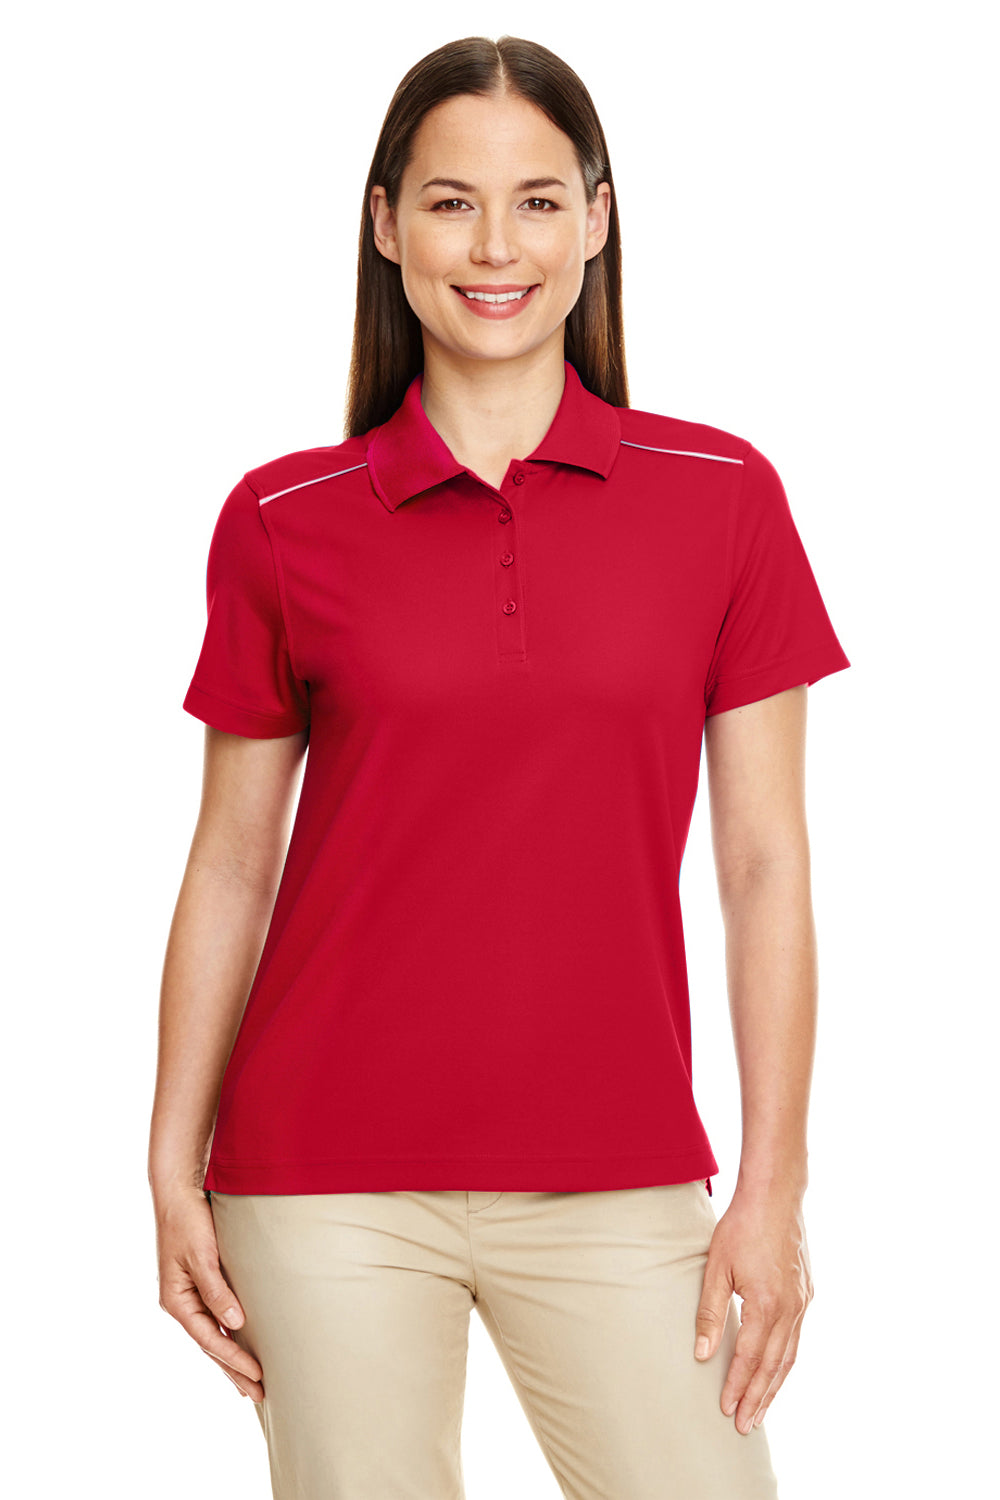 Core 365 78181R Womens Radiant Performance Moisture Wicking Short Sleeve Polo Shirt Red Front